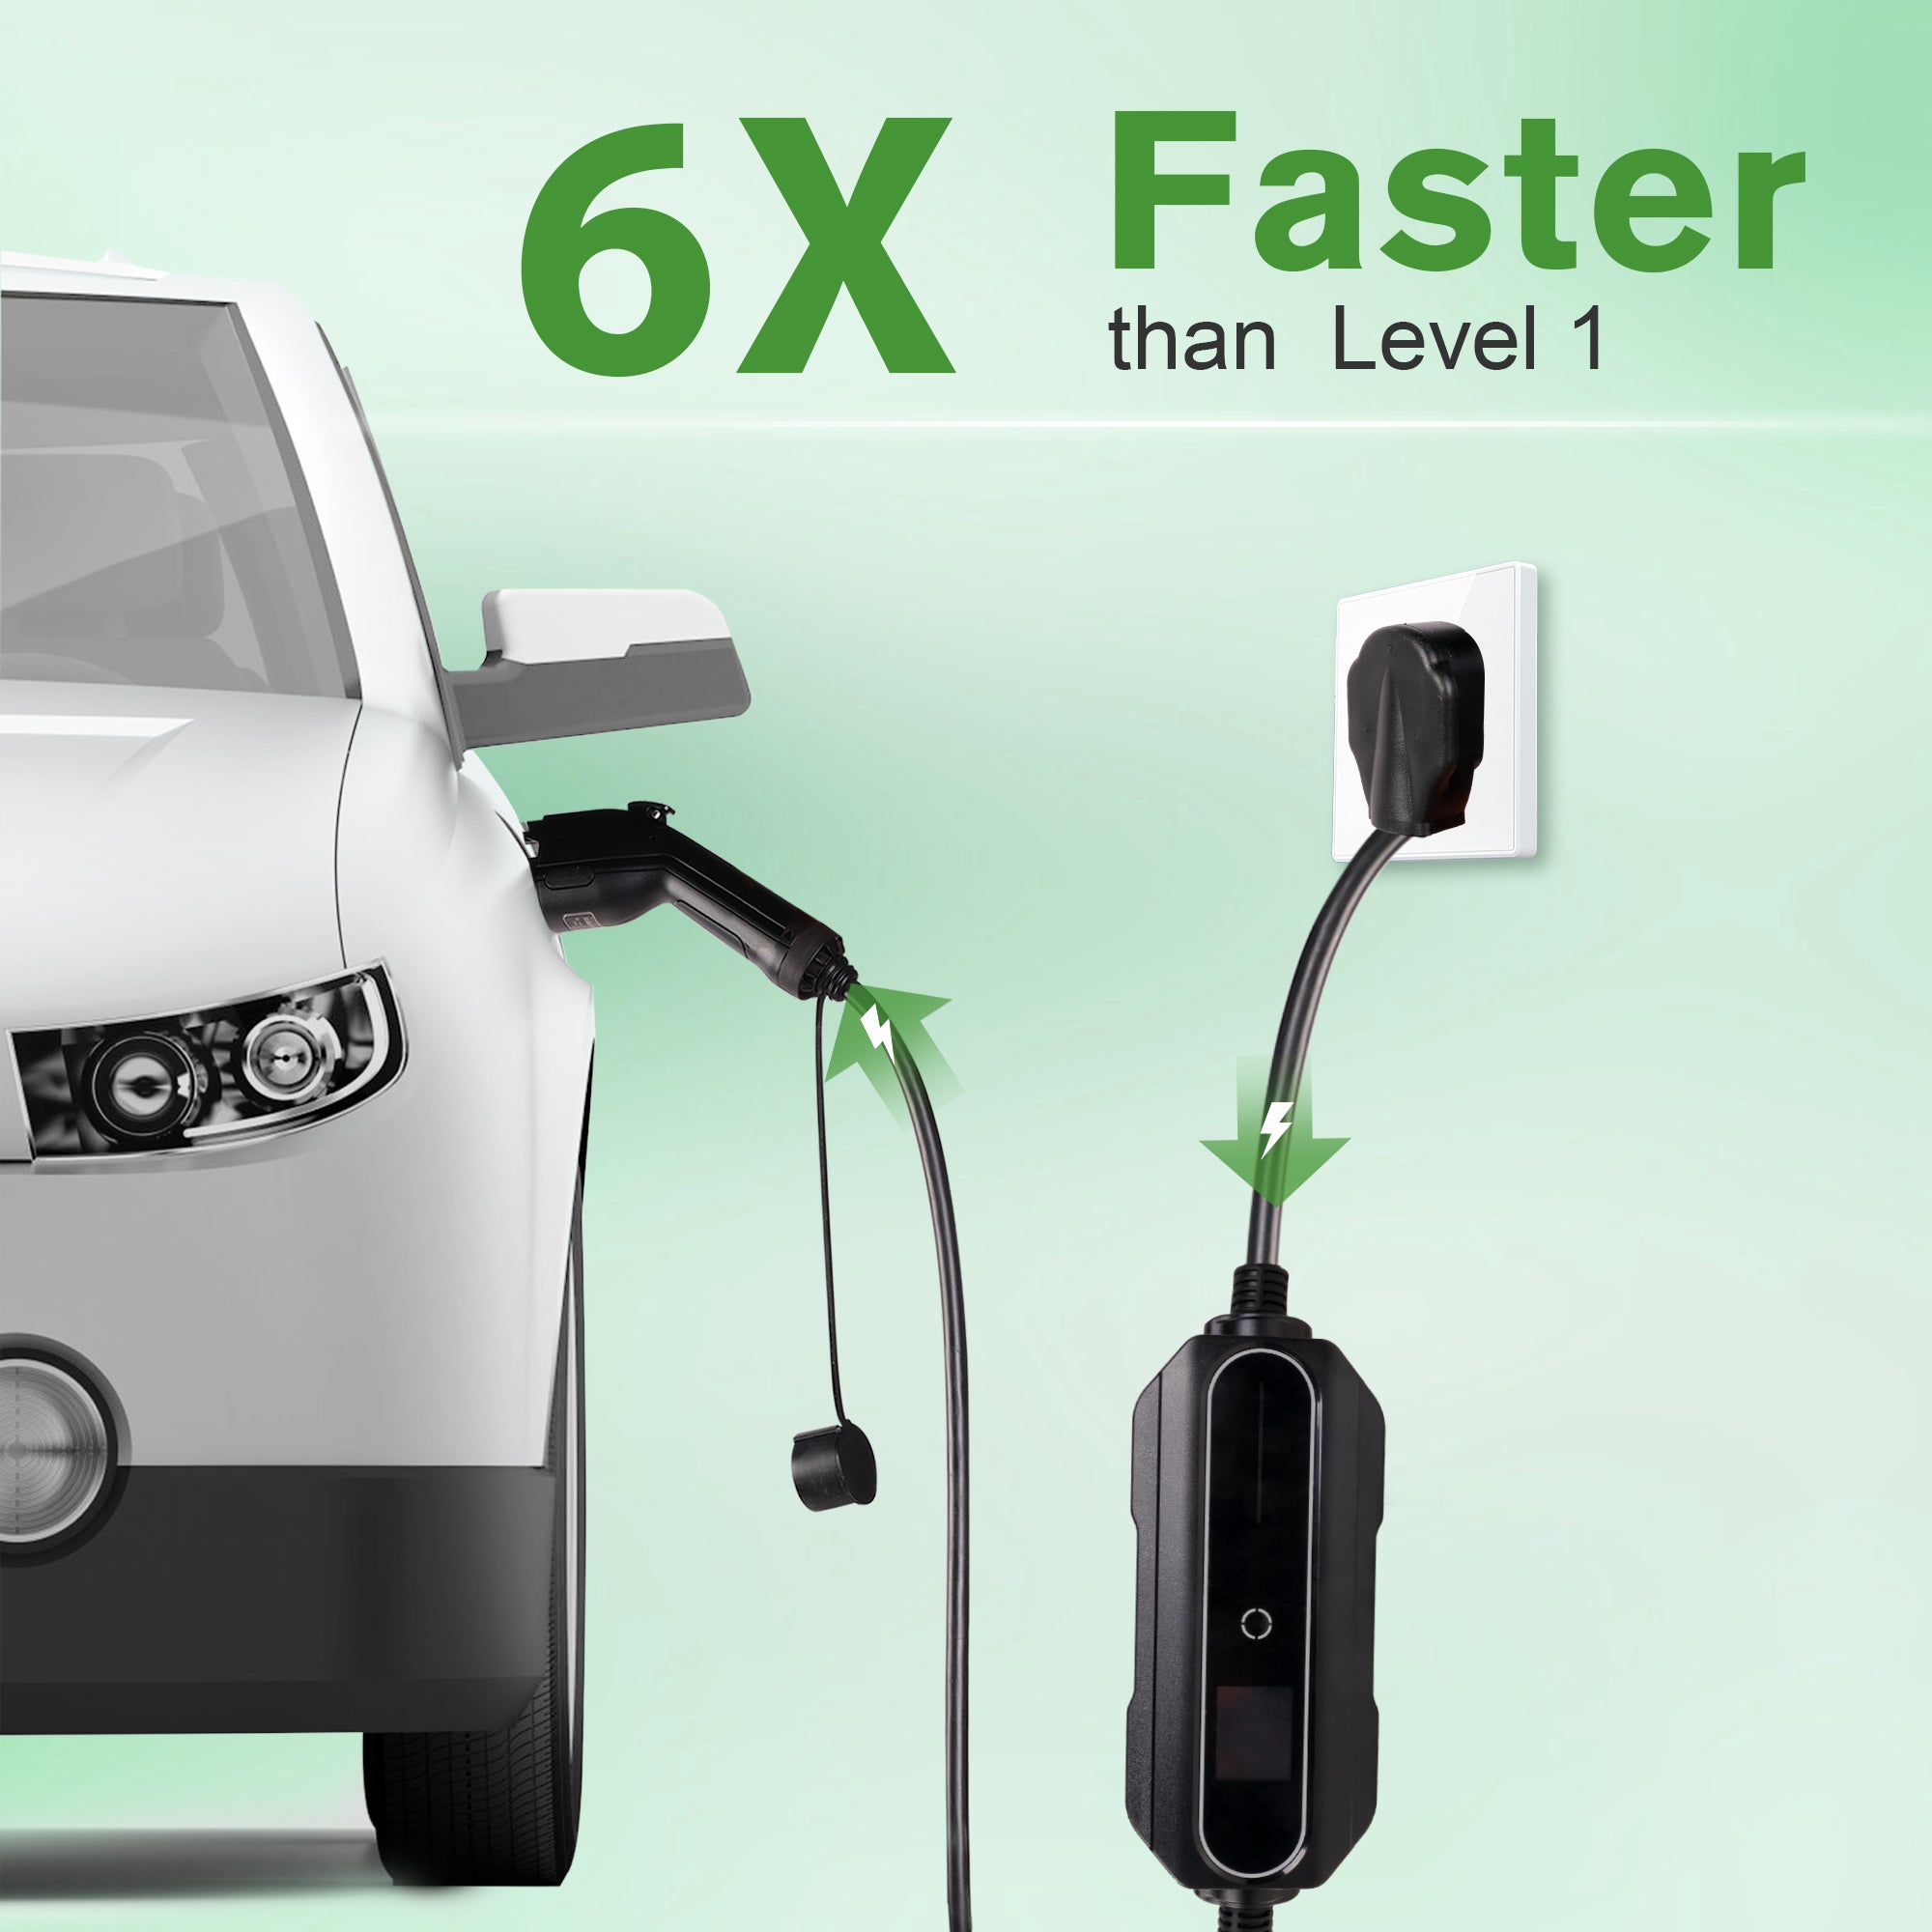 (Out of Stock) 32A 21ft Portable Level 1-2 Electric Vehicle (EV) 110V-240V Charger with NEMA 14-50 Plug For J1772 EVs